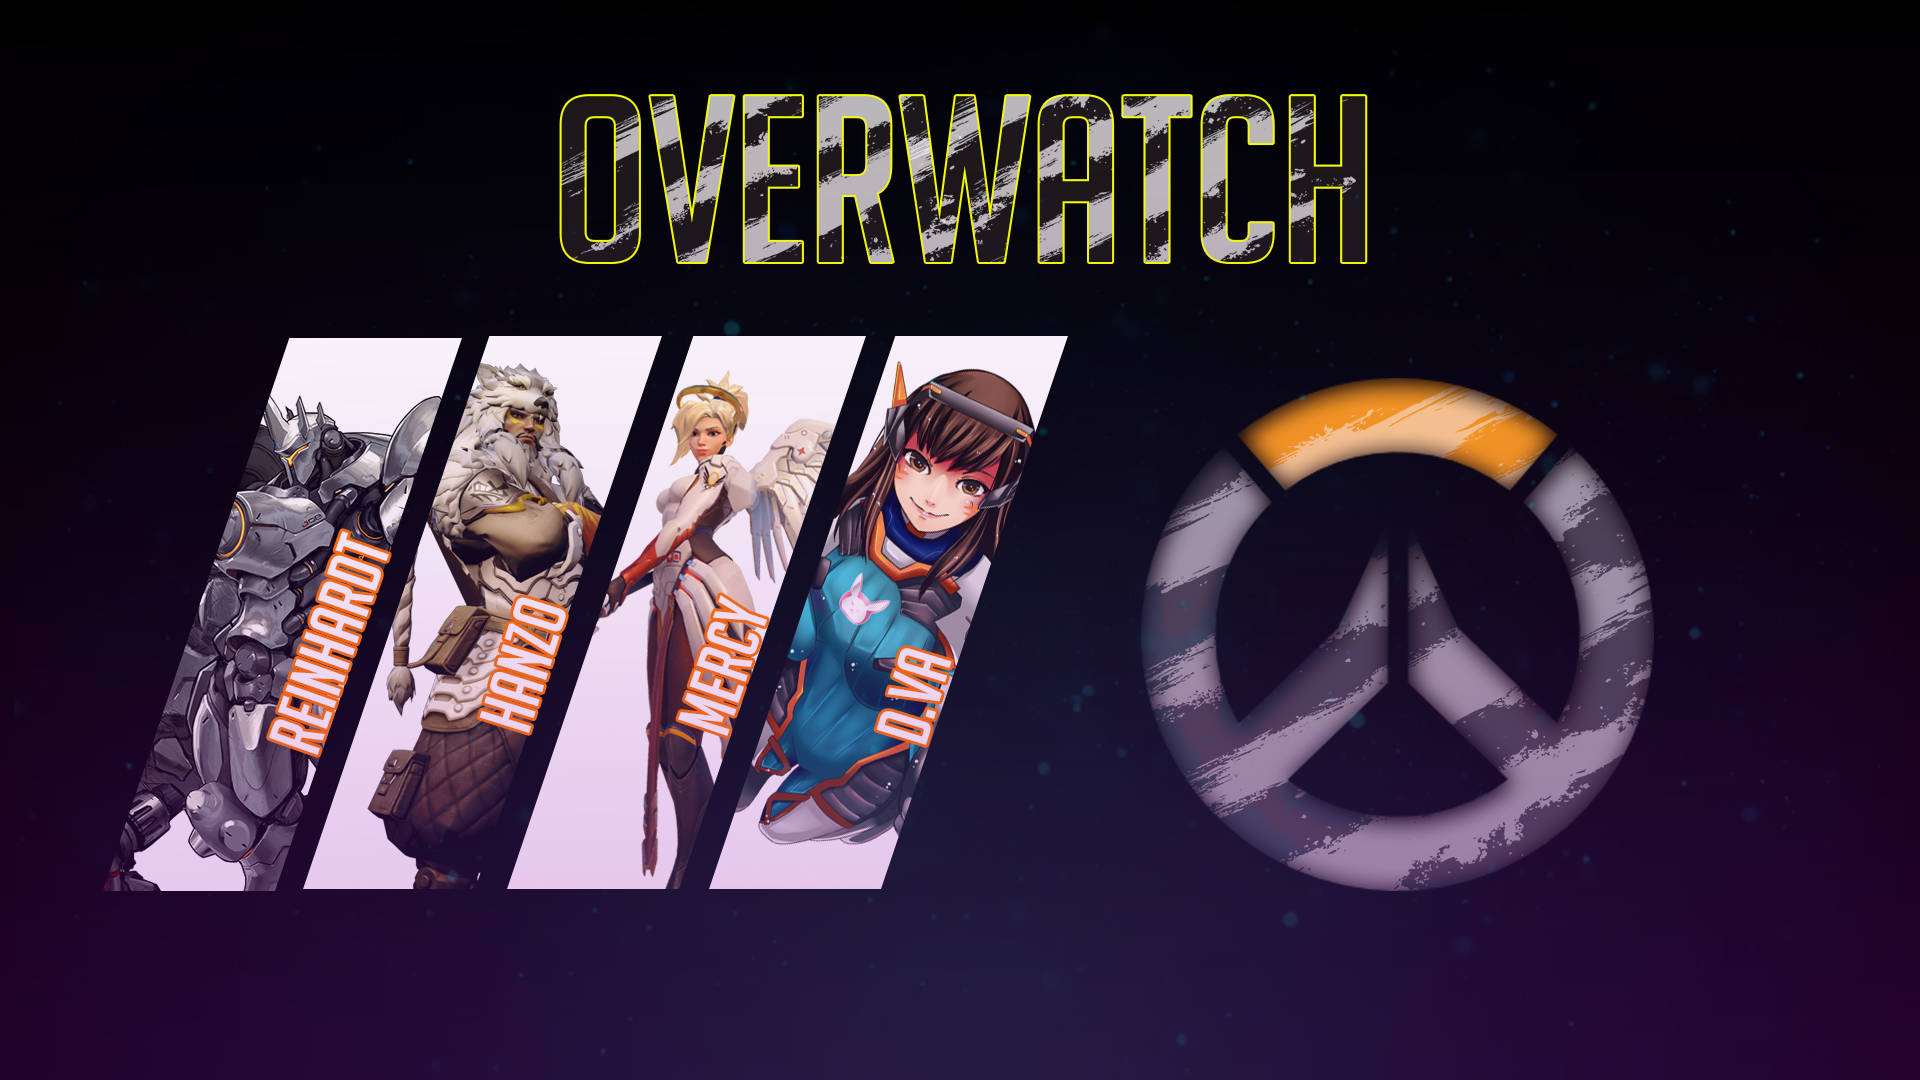 An Intense Moment Of Action In Overwatch 4k Wallpaper